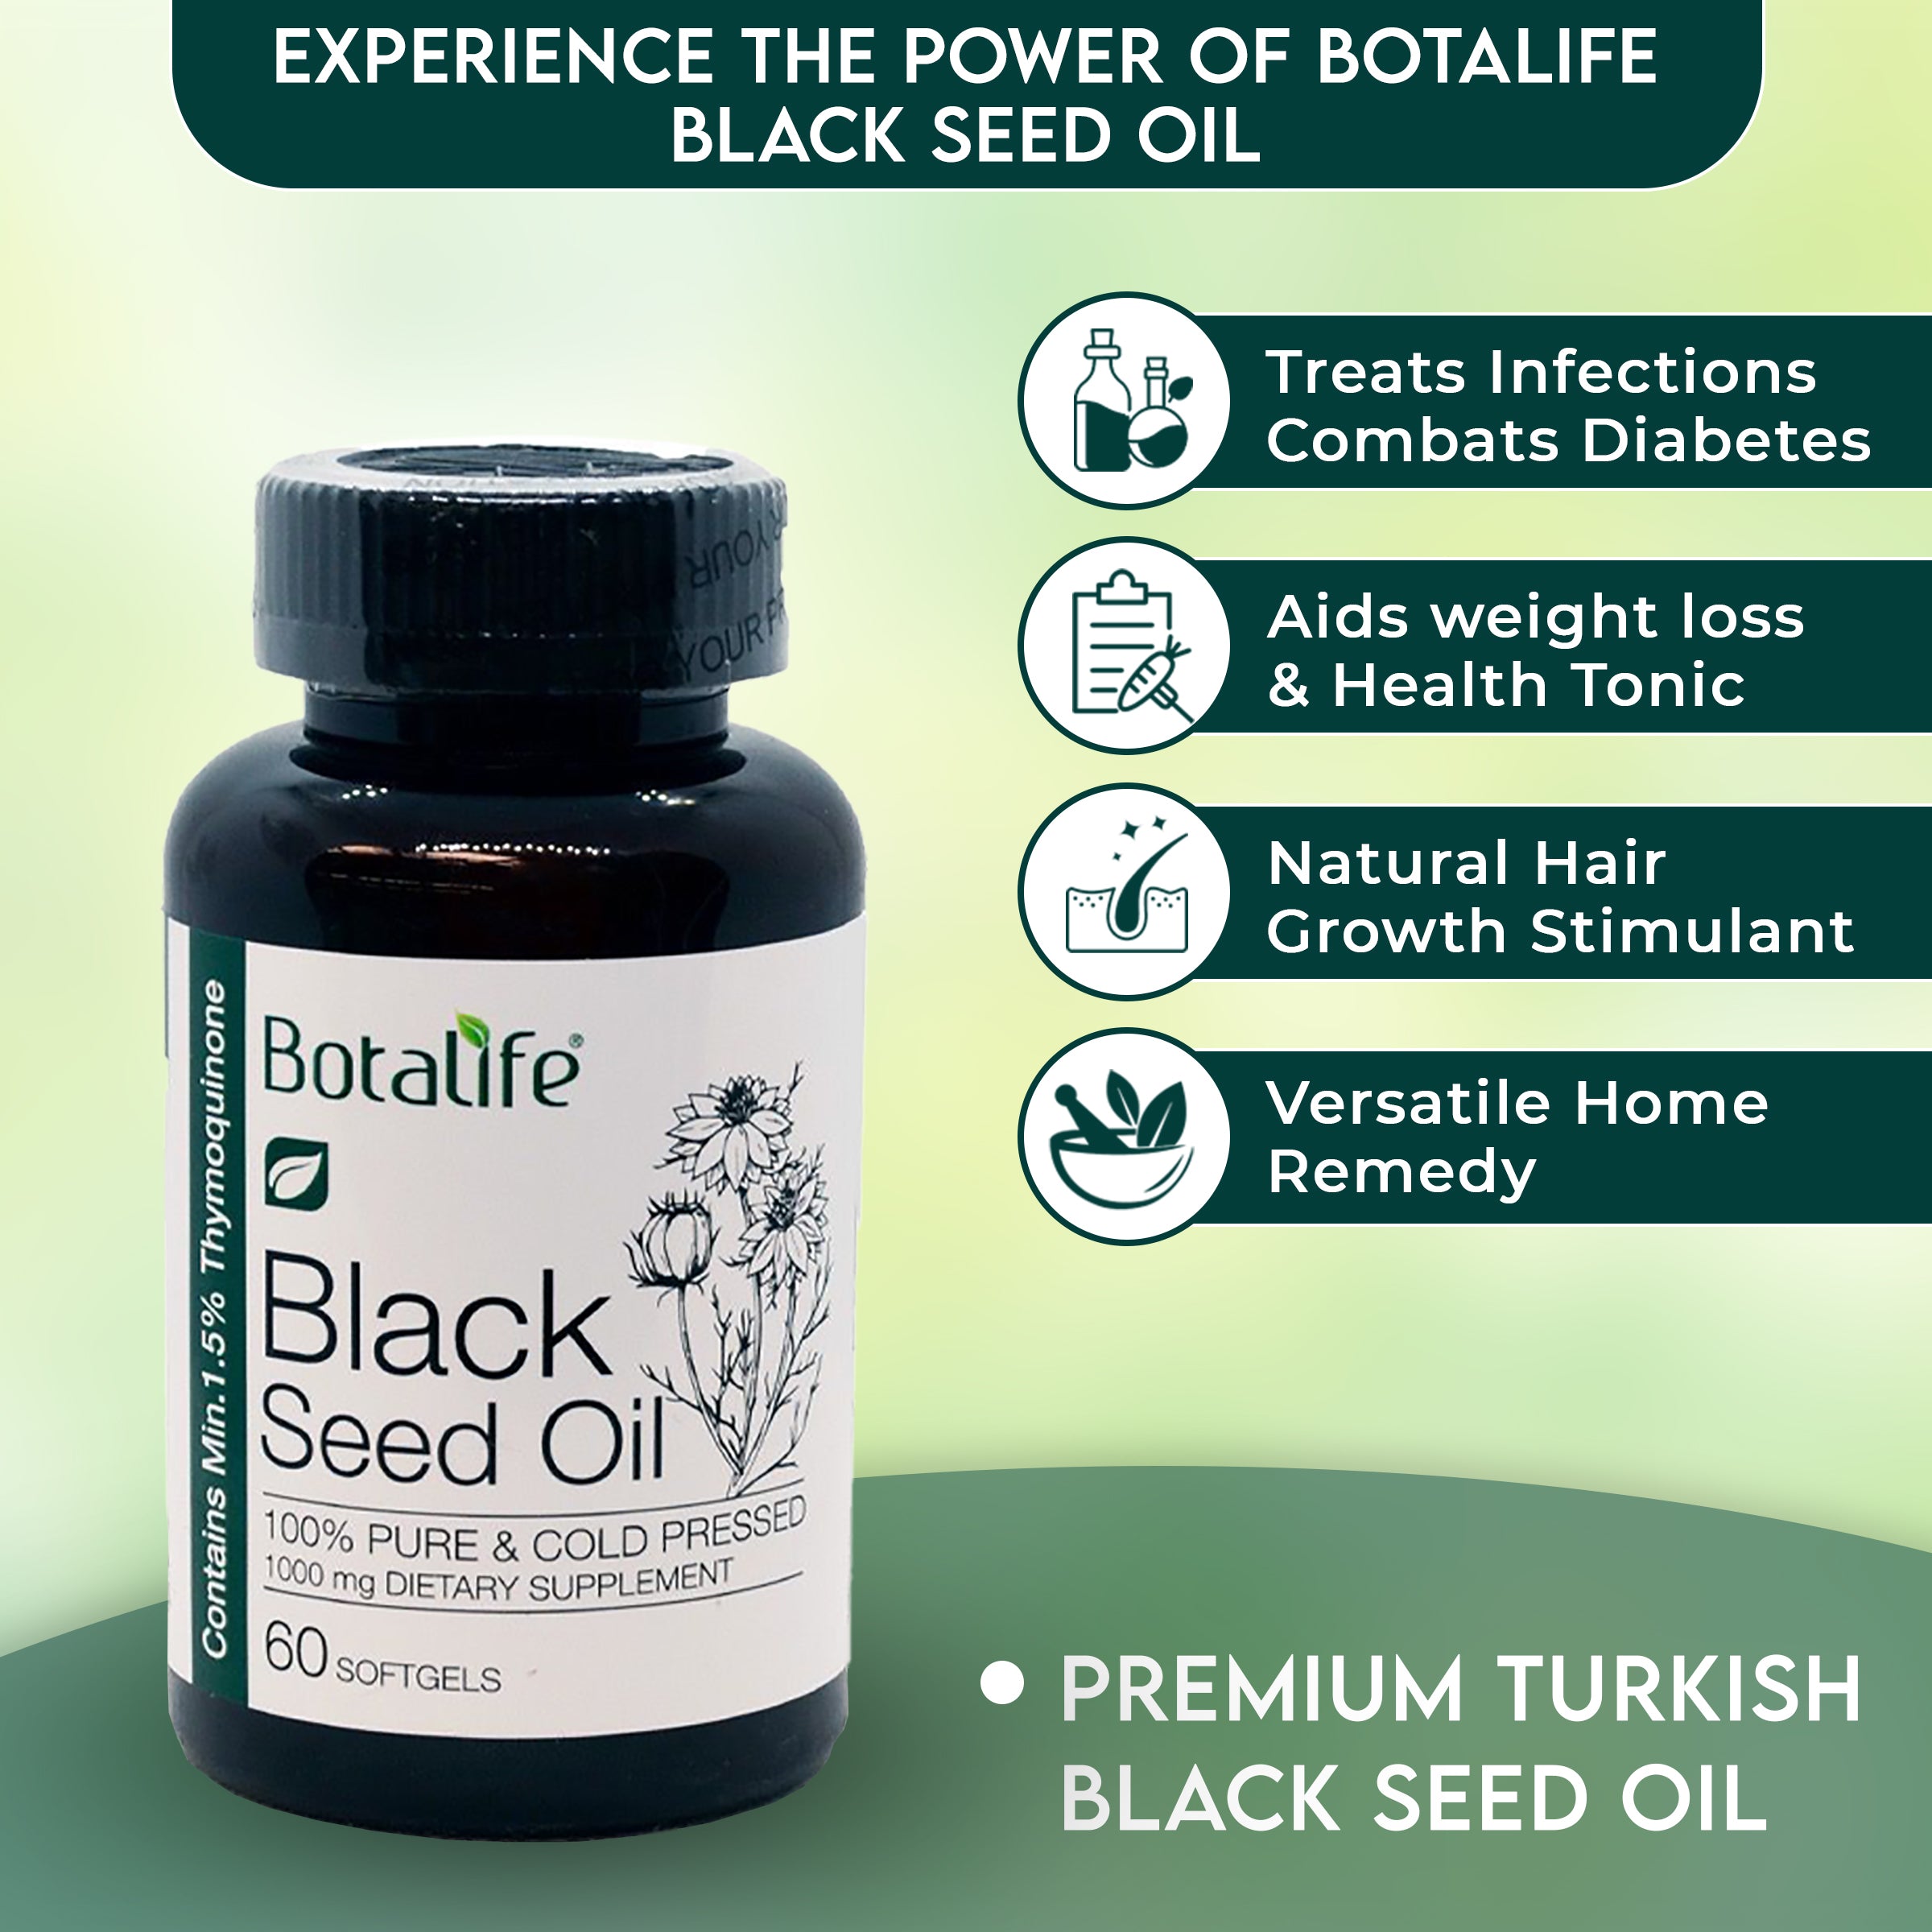 Botalife Black seed oil aids weight loss